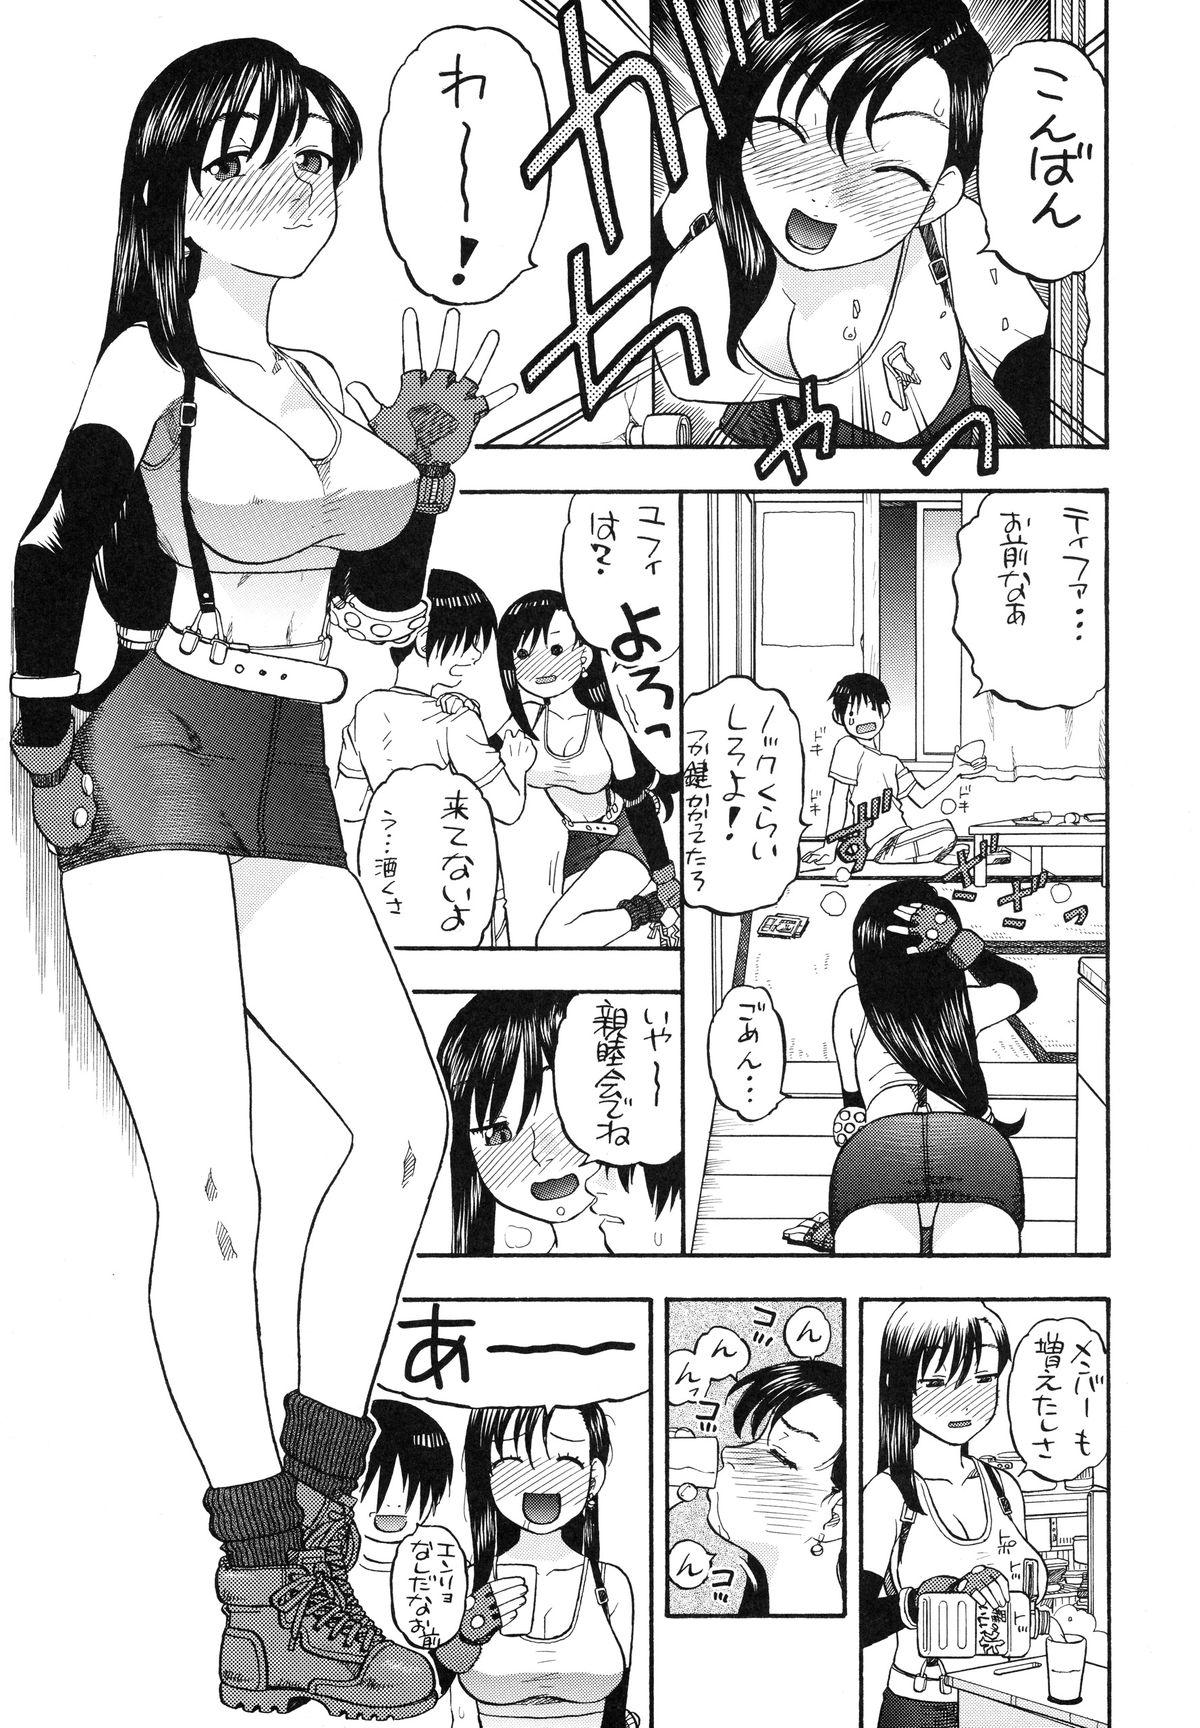 Tifa to Yuffie to Yojouhan 4